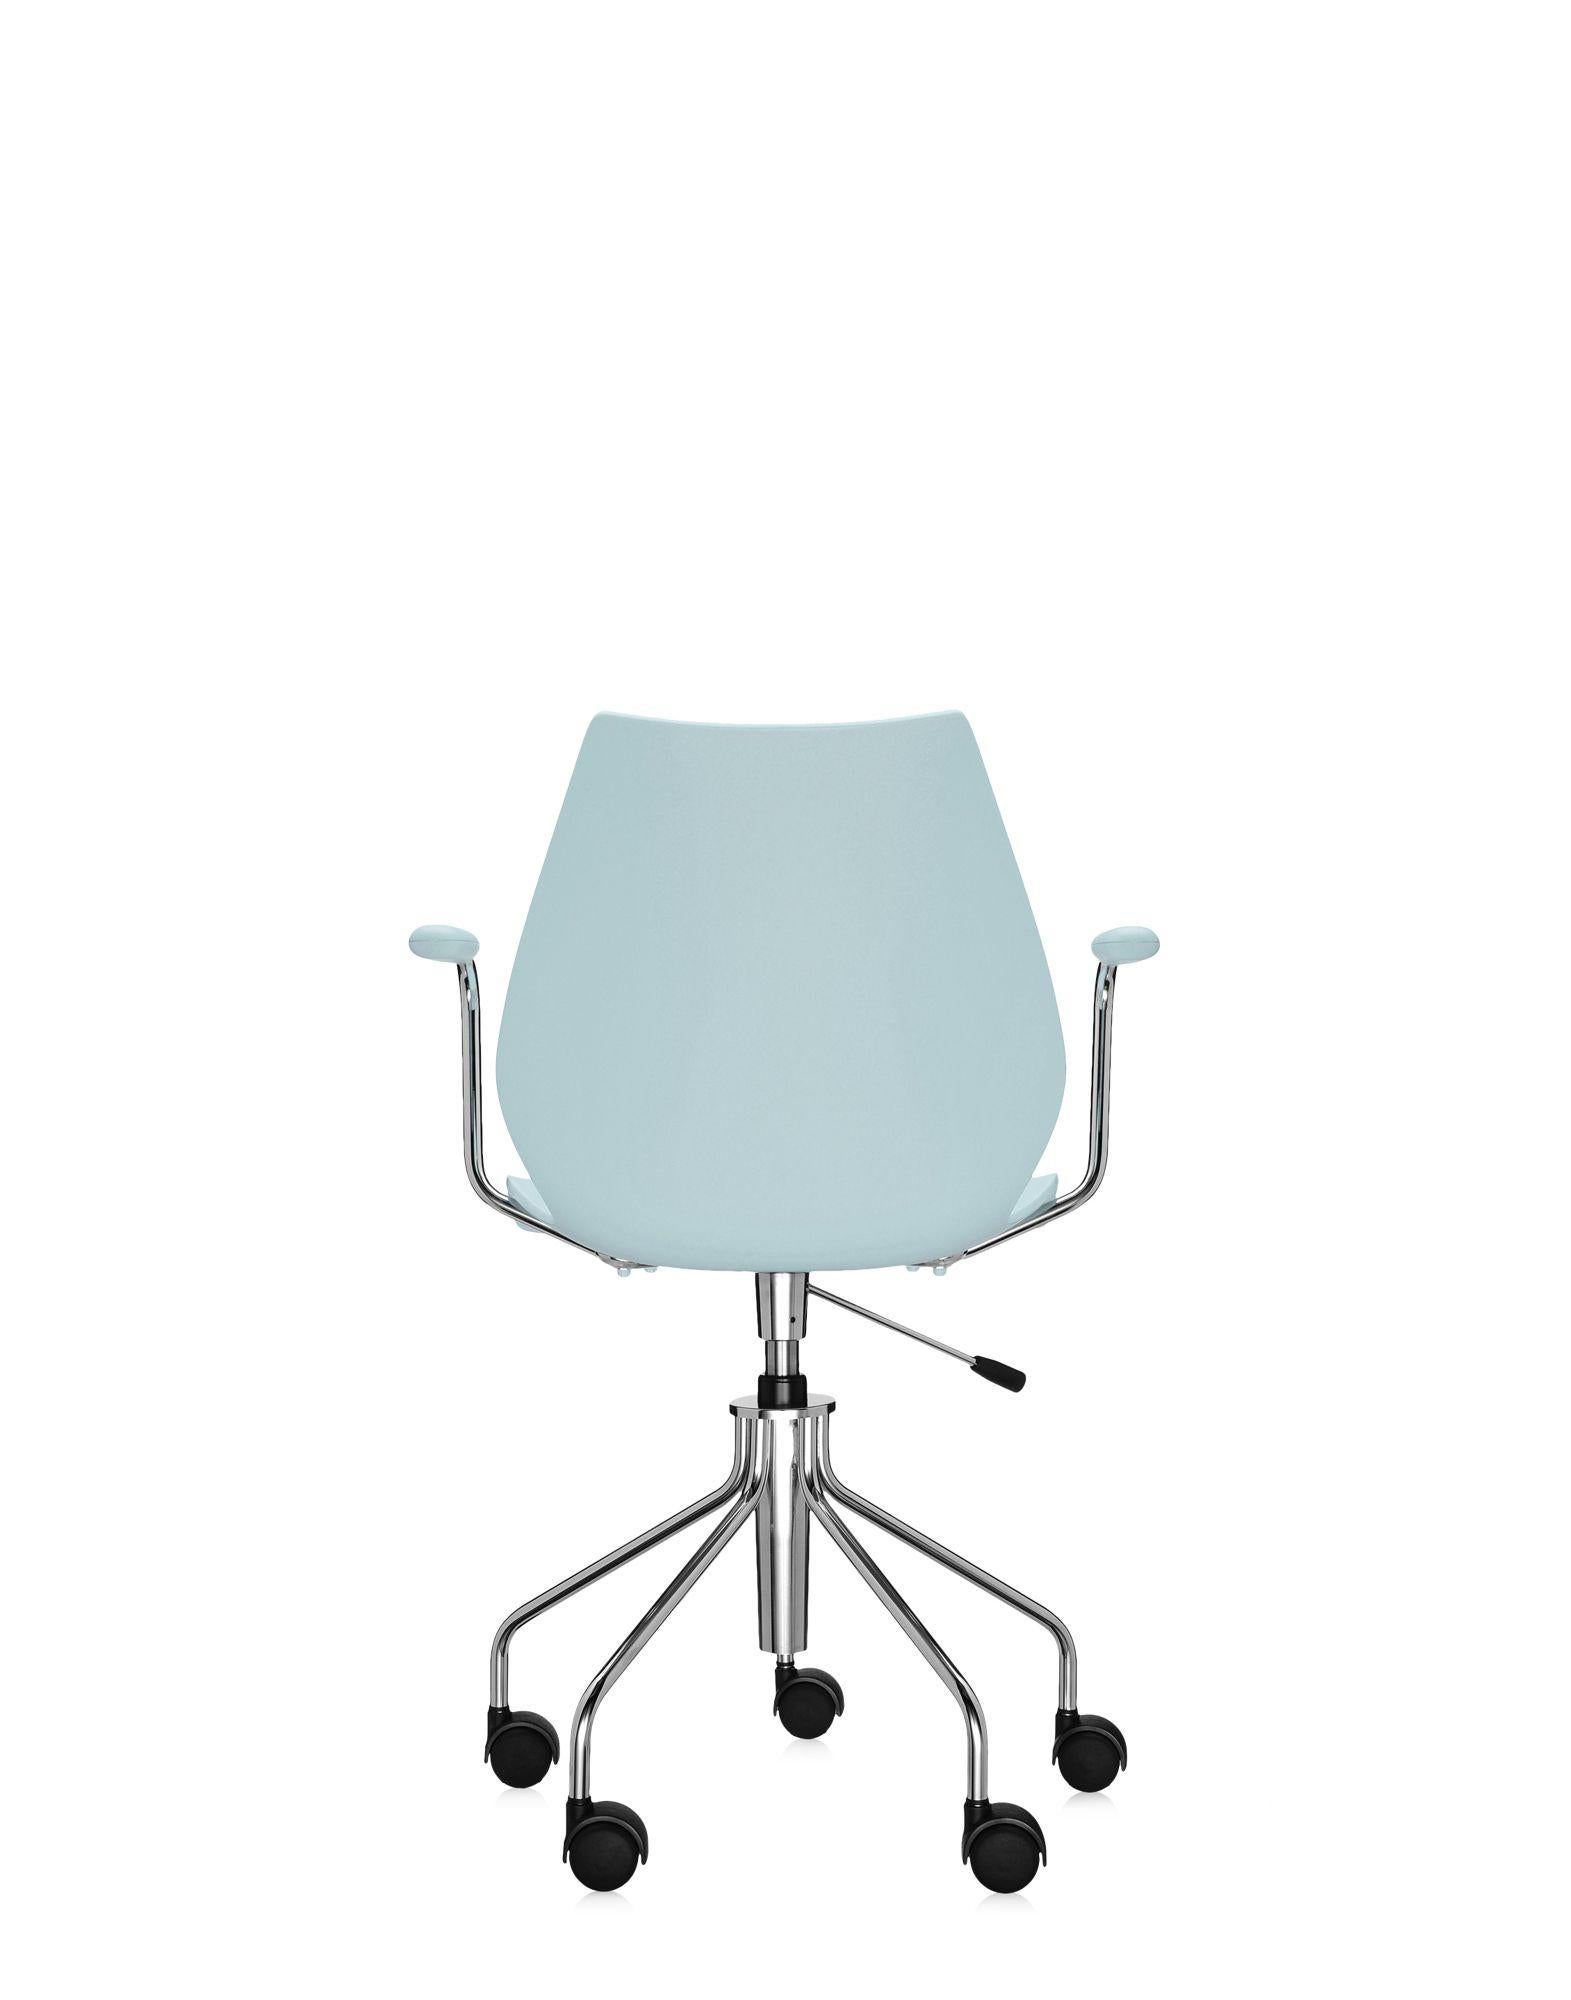 Italian Kartell Maui Swivel Chair Adjustable in Pale Blue by Vico Magistretti